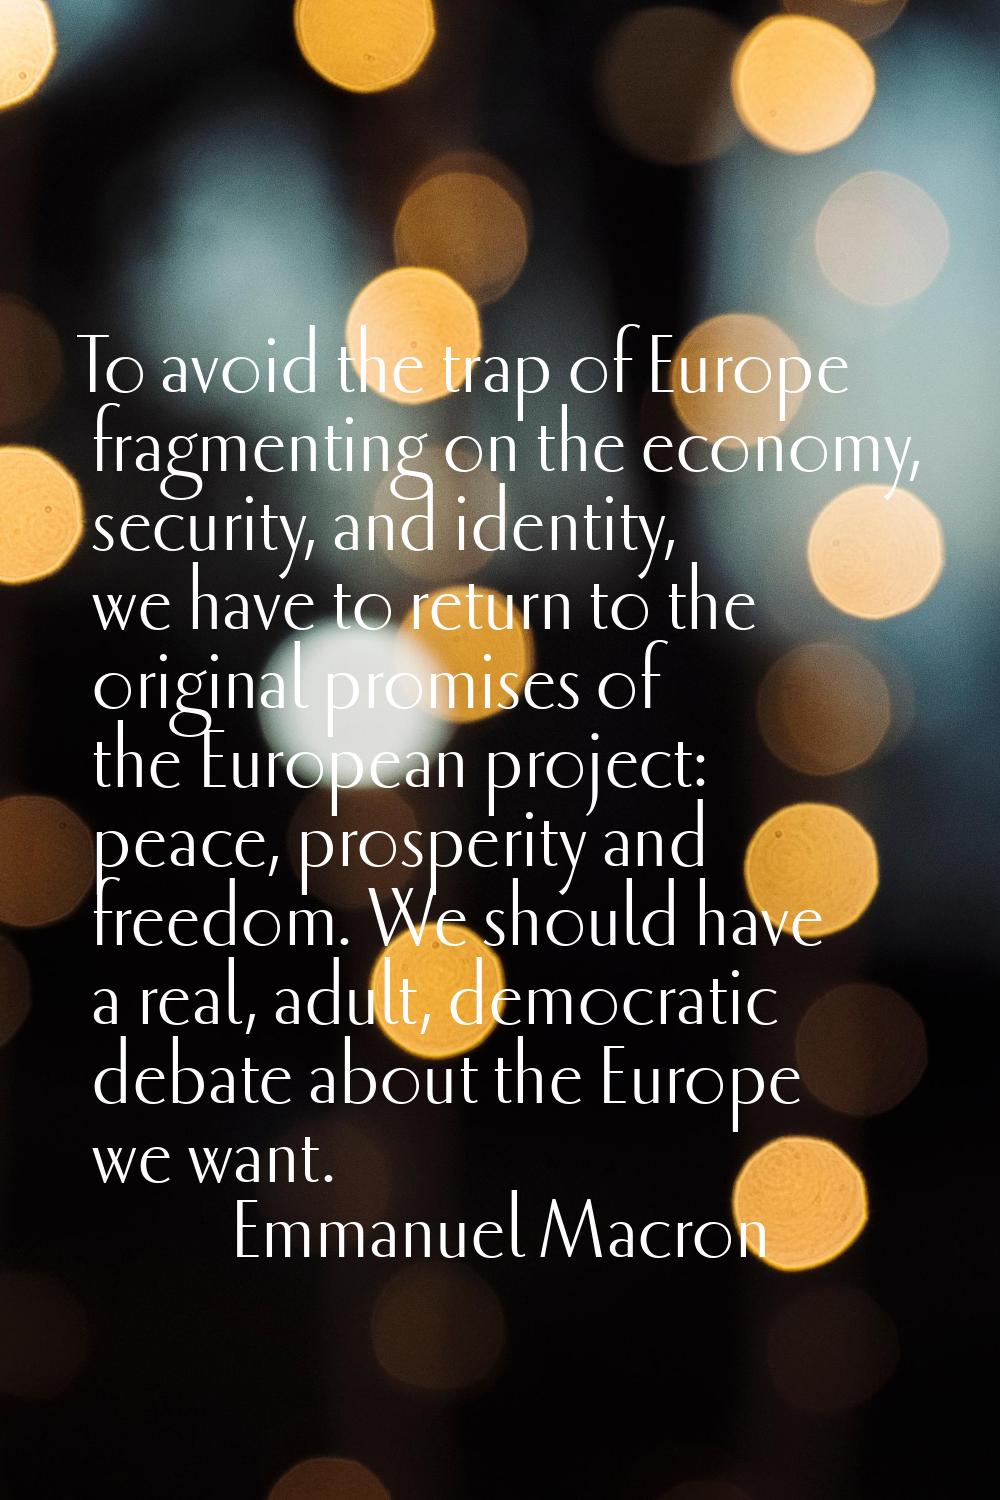 To avoid the trap of Europe fragmenting on the economy, security, and identity, we have to return t